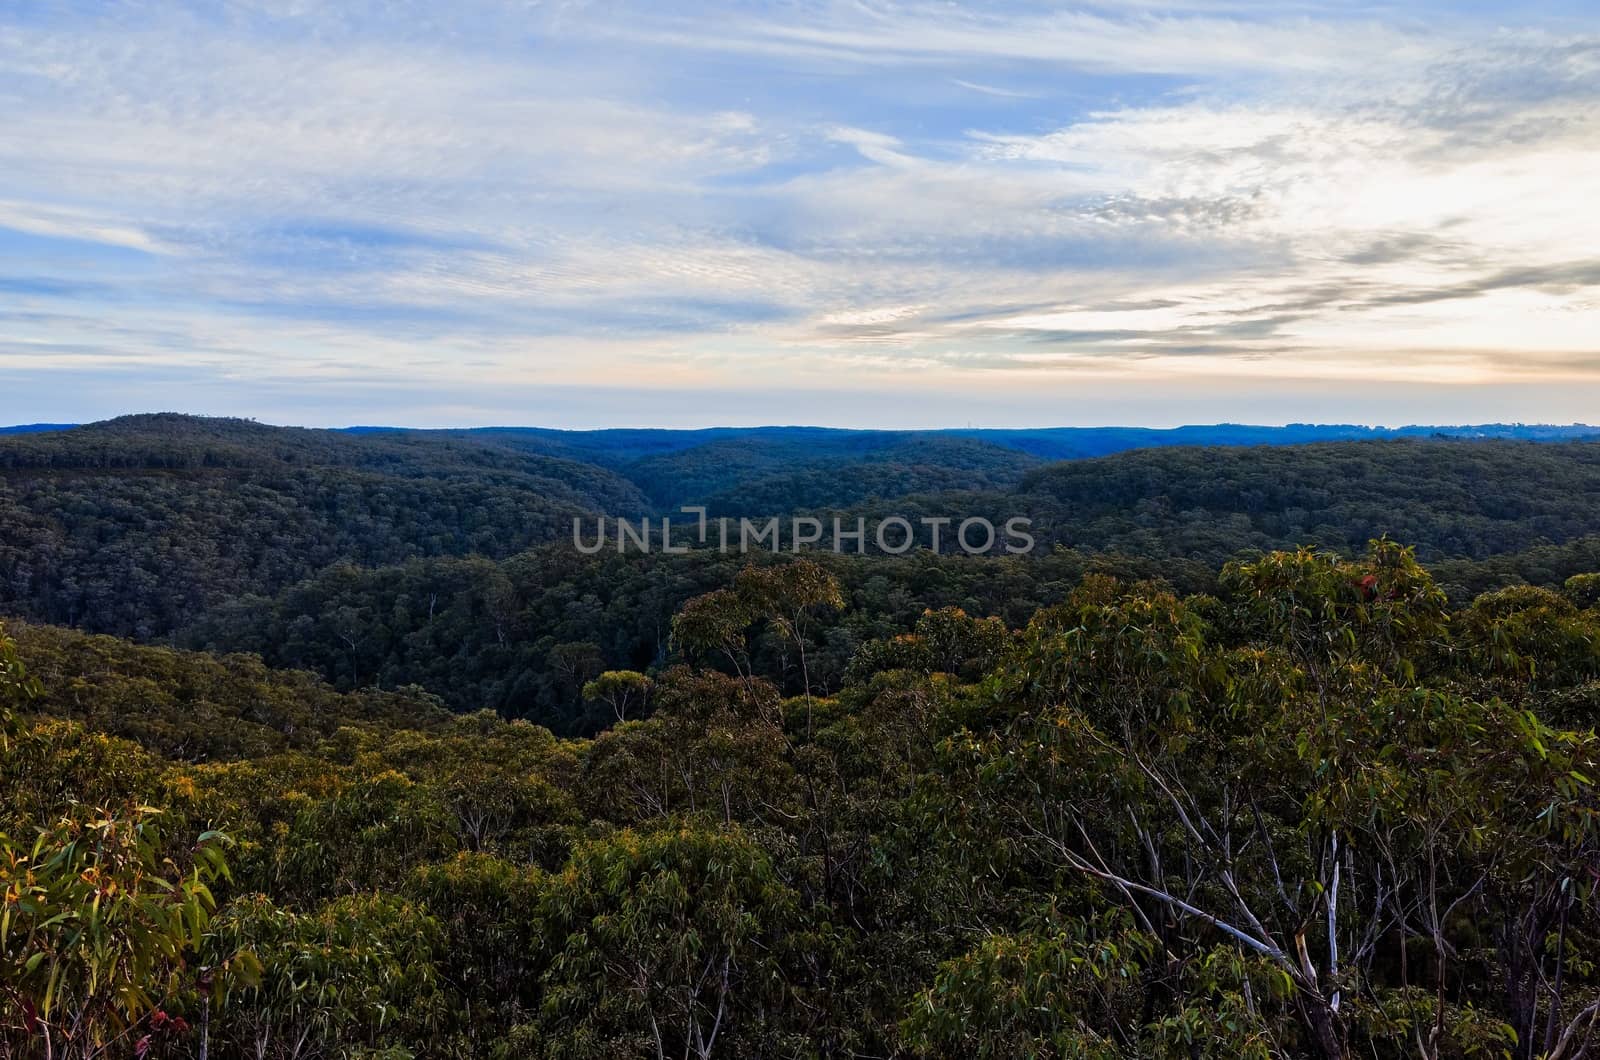 Blue Mountains National Park by jaaske